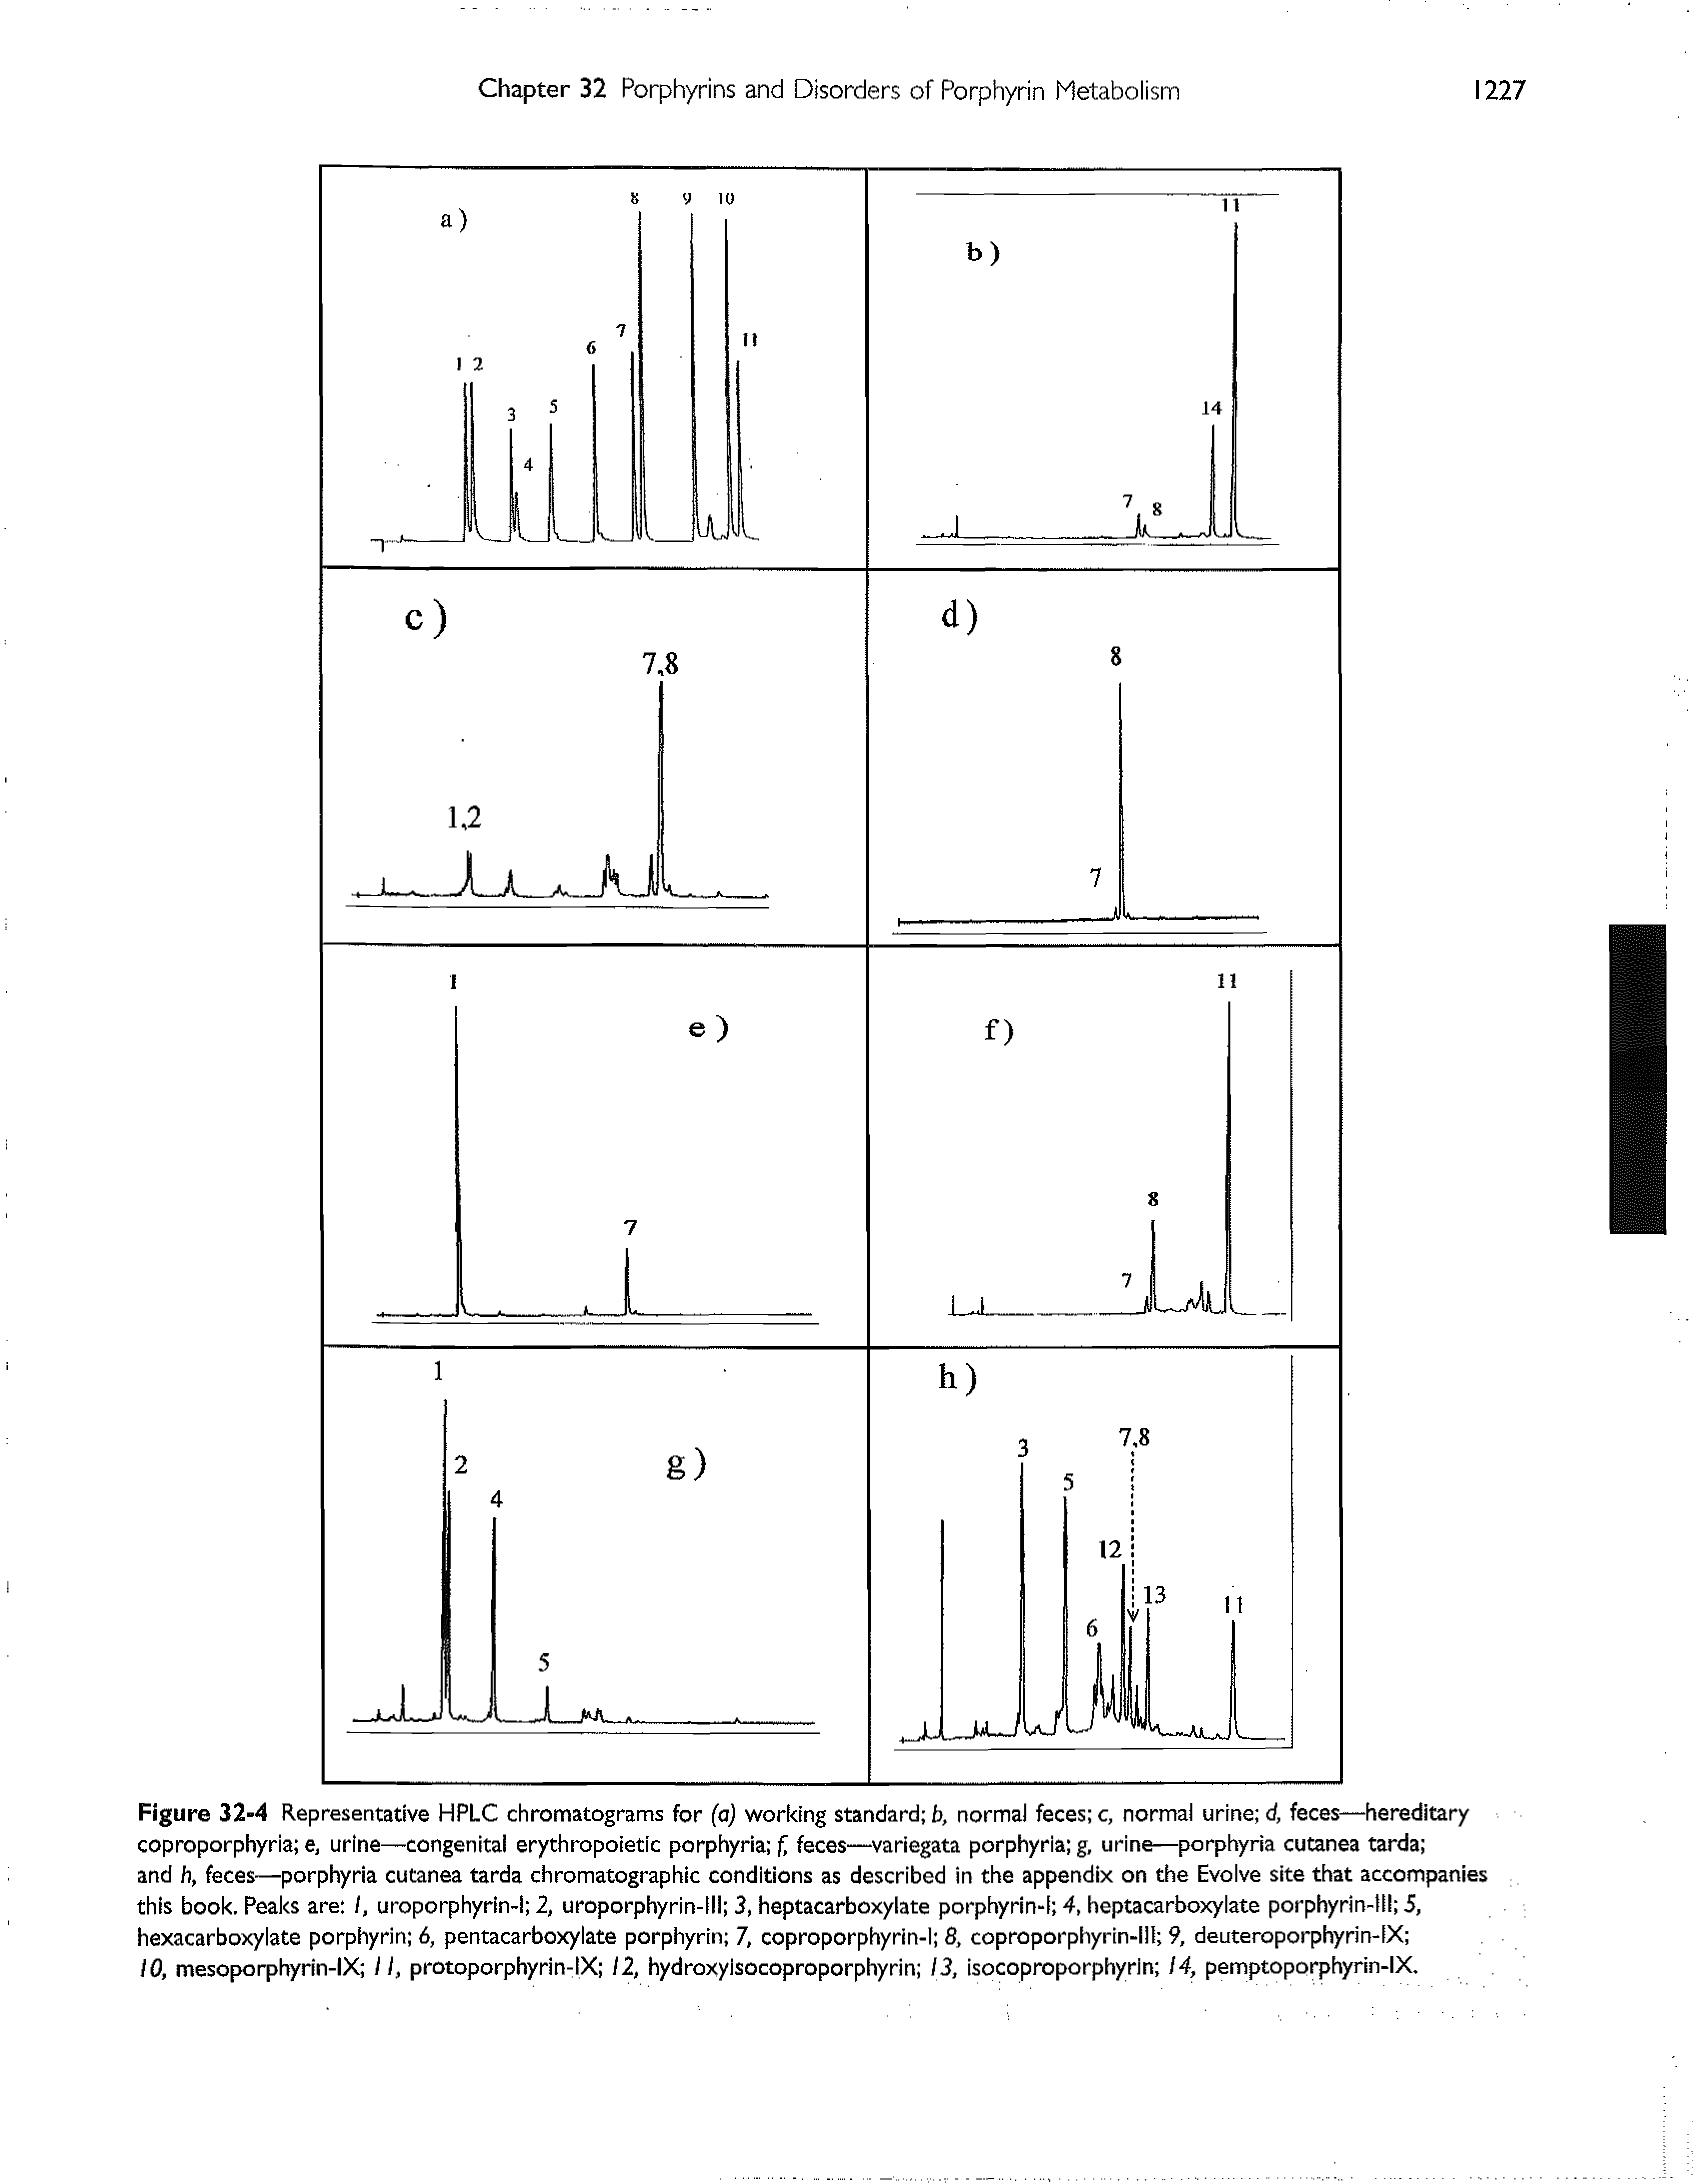 Figure 32-4 Representative HPLC chromatograms for (a) working standard b, norma) feces c, normal urine d, feces—hereditary coproporphyria e, urine—congenita erythropoietic porphyria f, feces—variegata porphyria g, urine—porphyria cutanea tarda and h, feces—porphyria cutanea tarda chromatographic conditions as described in the appendix on the Evolve site that accompanies this book. Peaks are I, uroporphyrin- 2, uroporphyrin-l 3, heptacarboxyiate porphyrin-l 4, heptacarboxylate porphyrin-tl 5, hexacarboxylate porphyrin 6, pentacarboxylate porphyrin 7, coproporphyrin-1 8, coproporphyrin- ll 9, deuteroporphyrin-IX ...